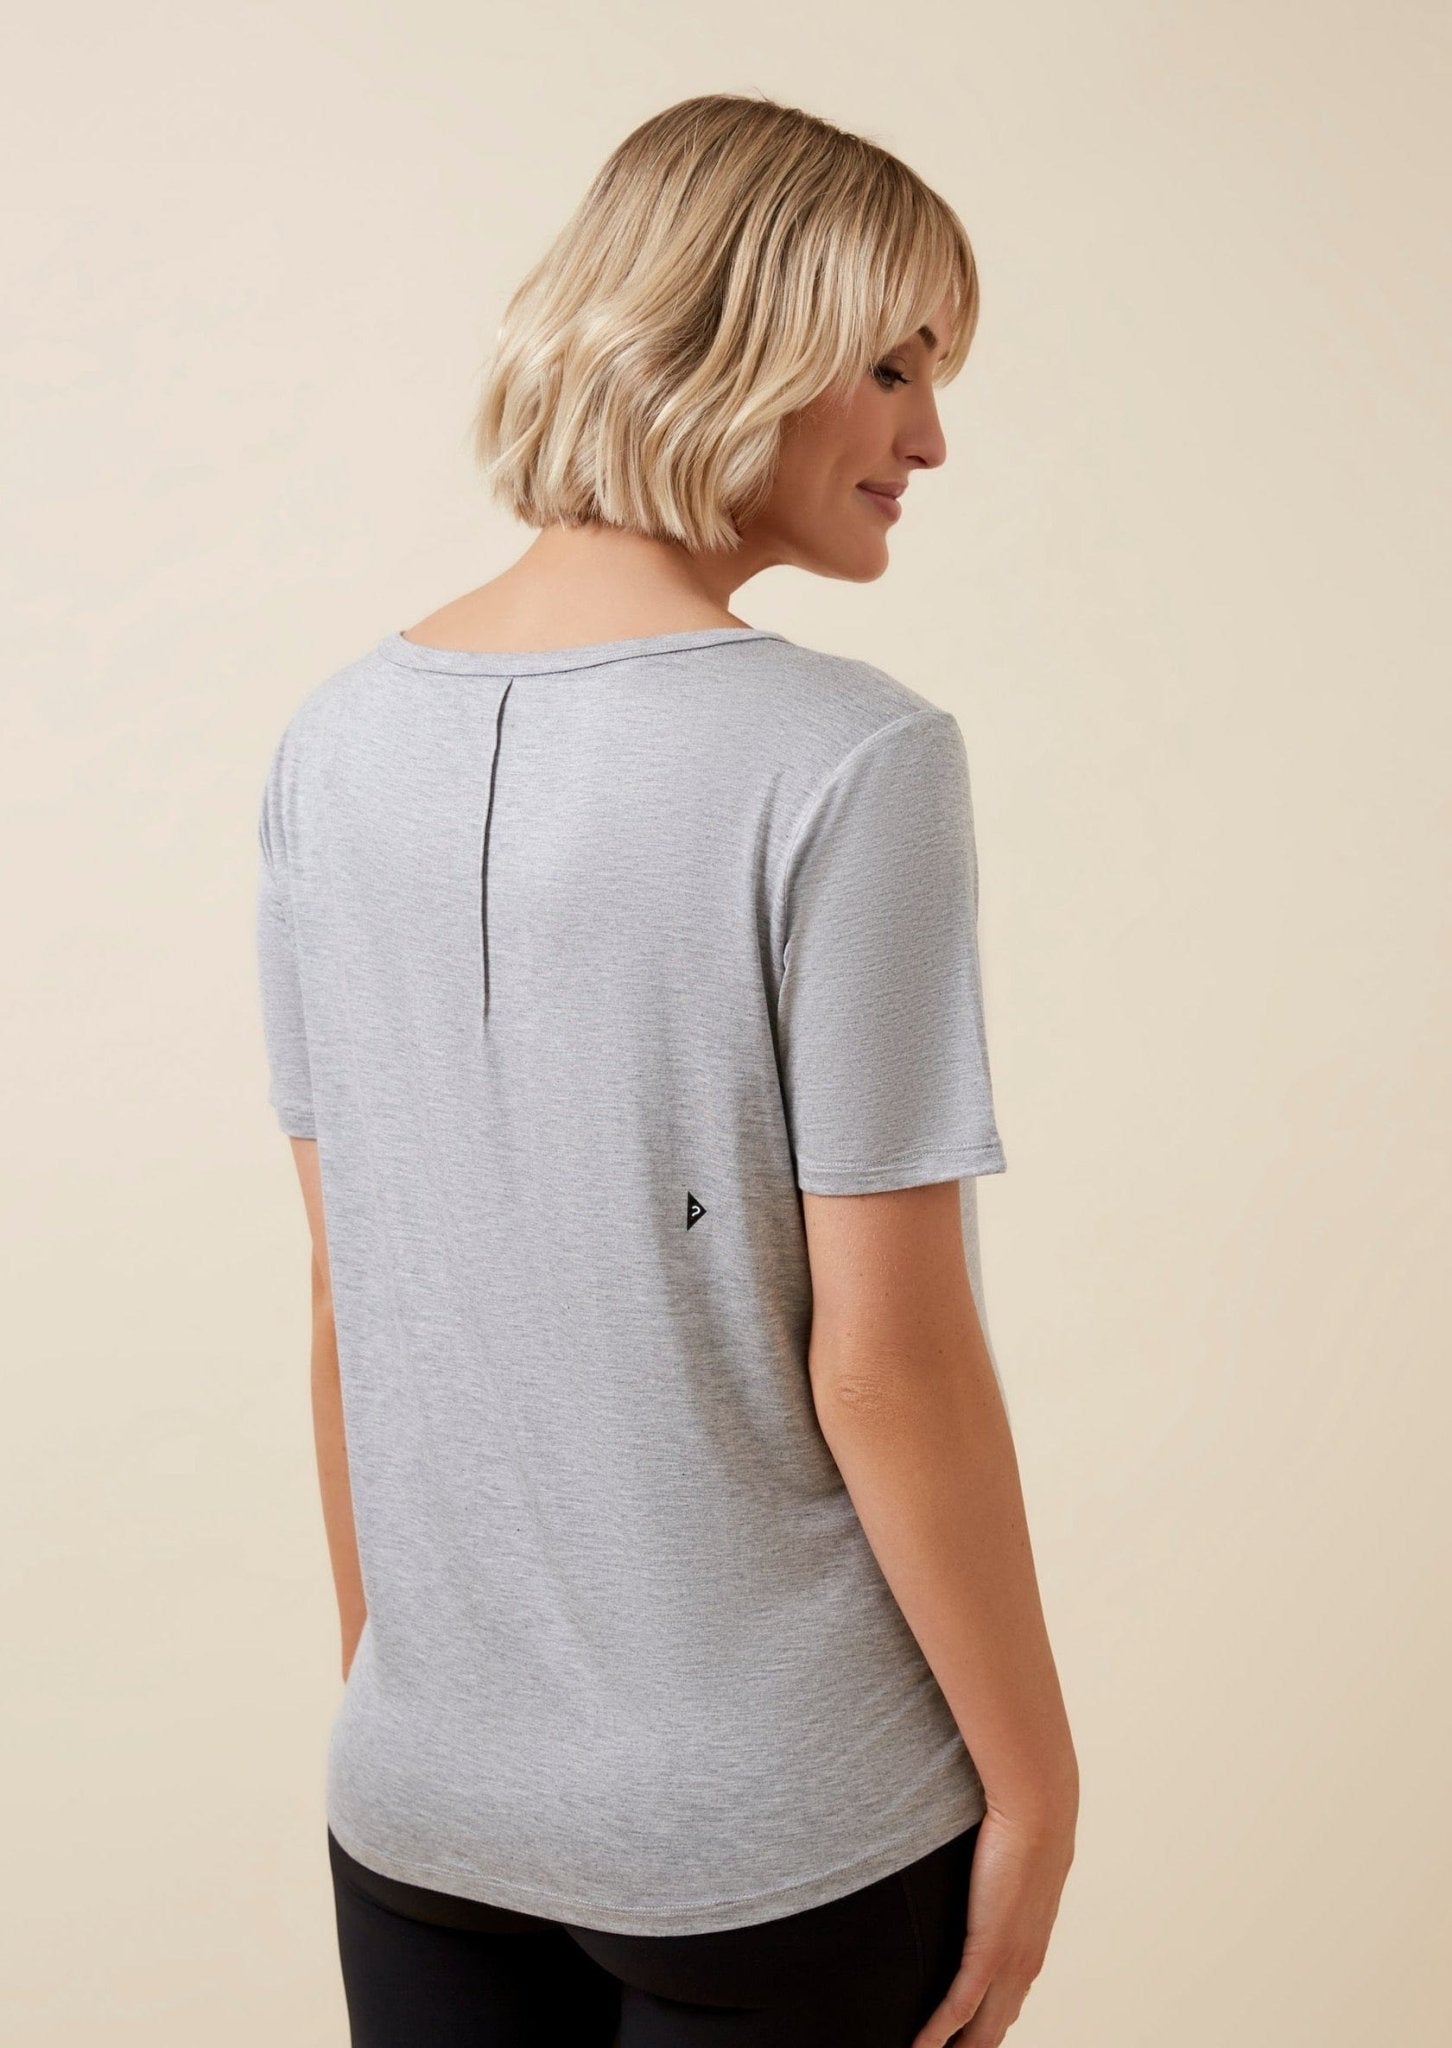 TheRY The Me Bamboo Slouch Tee in grey back view